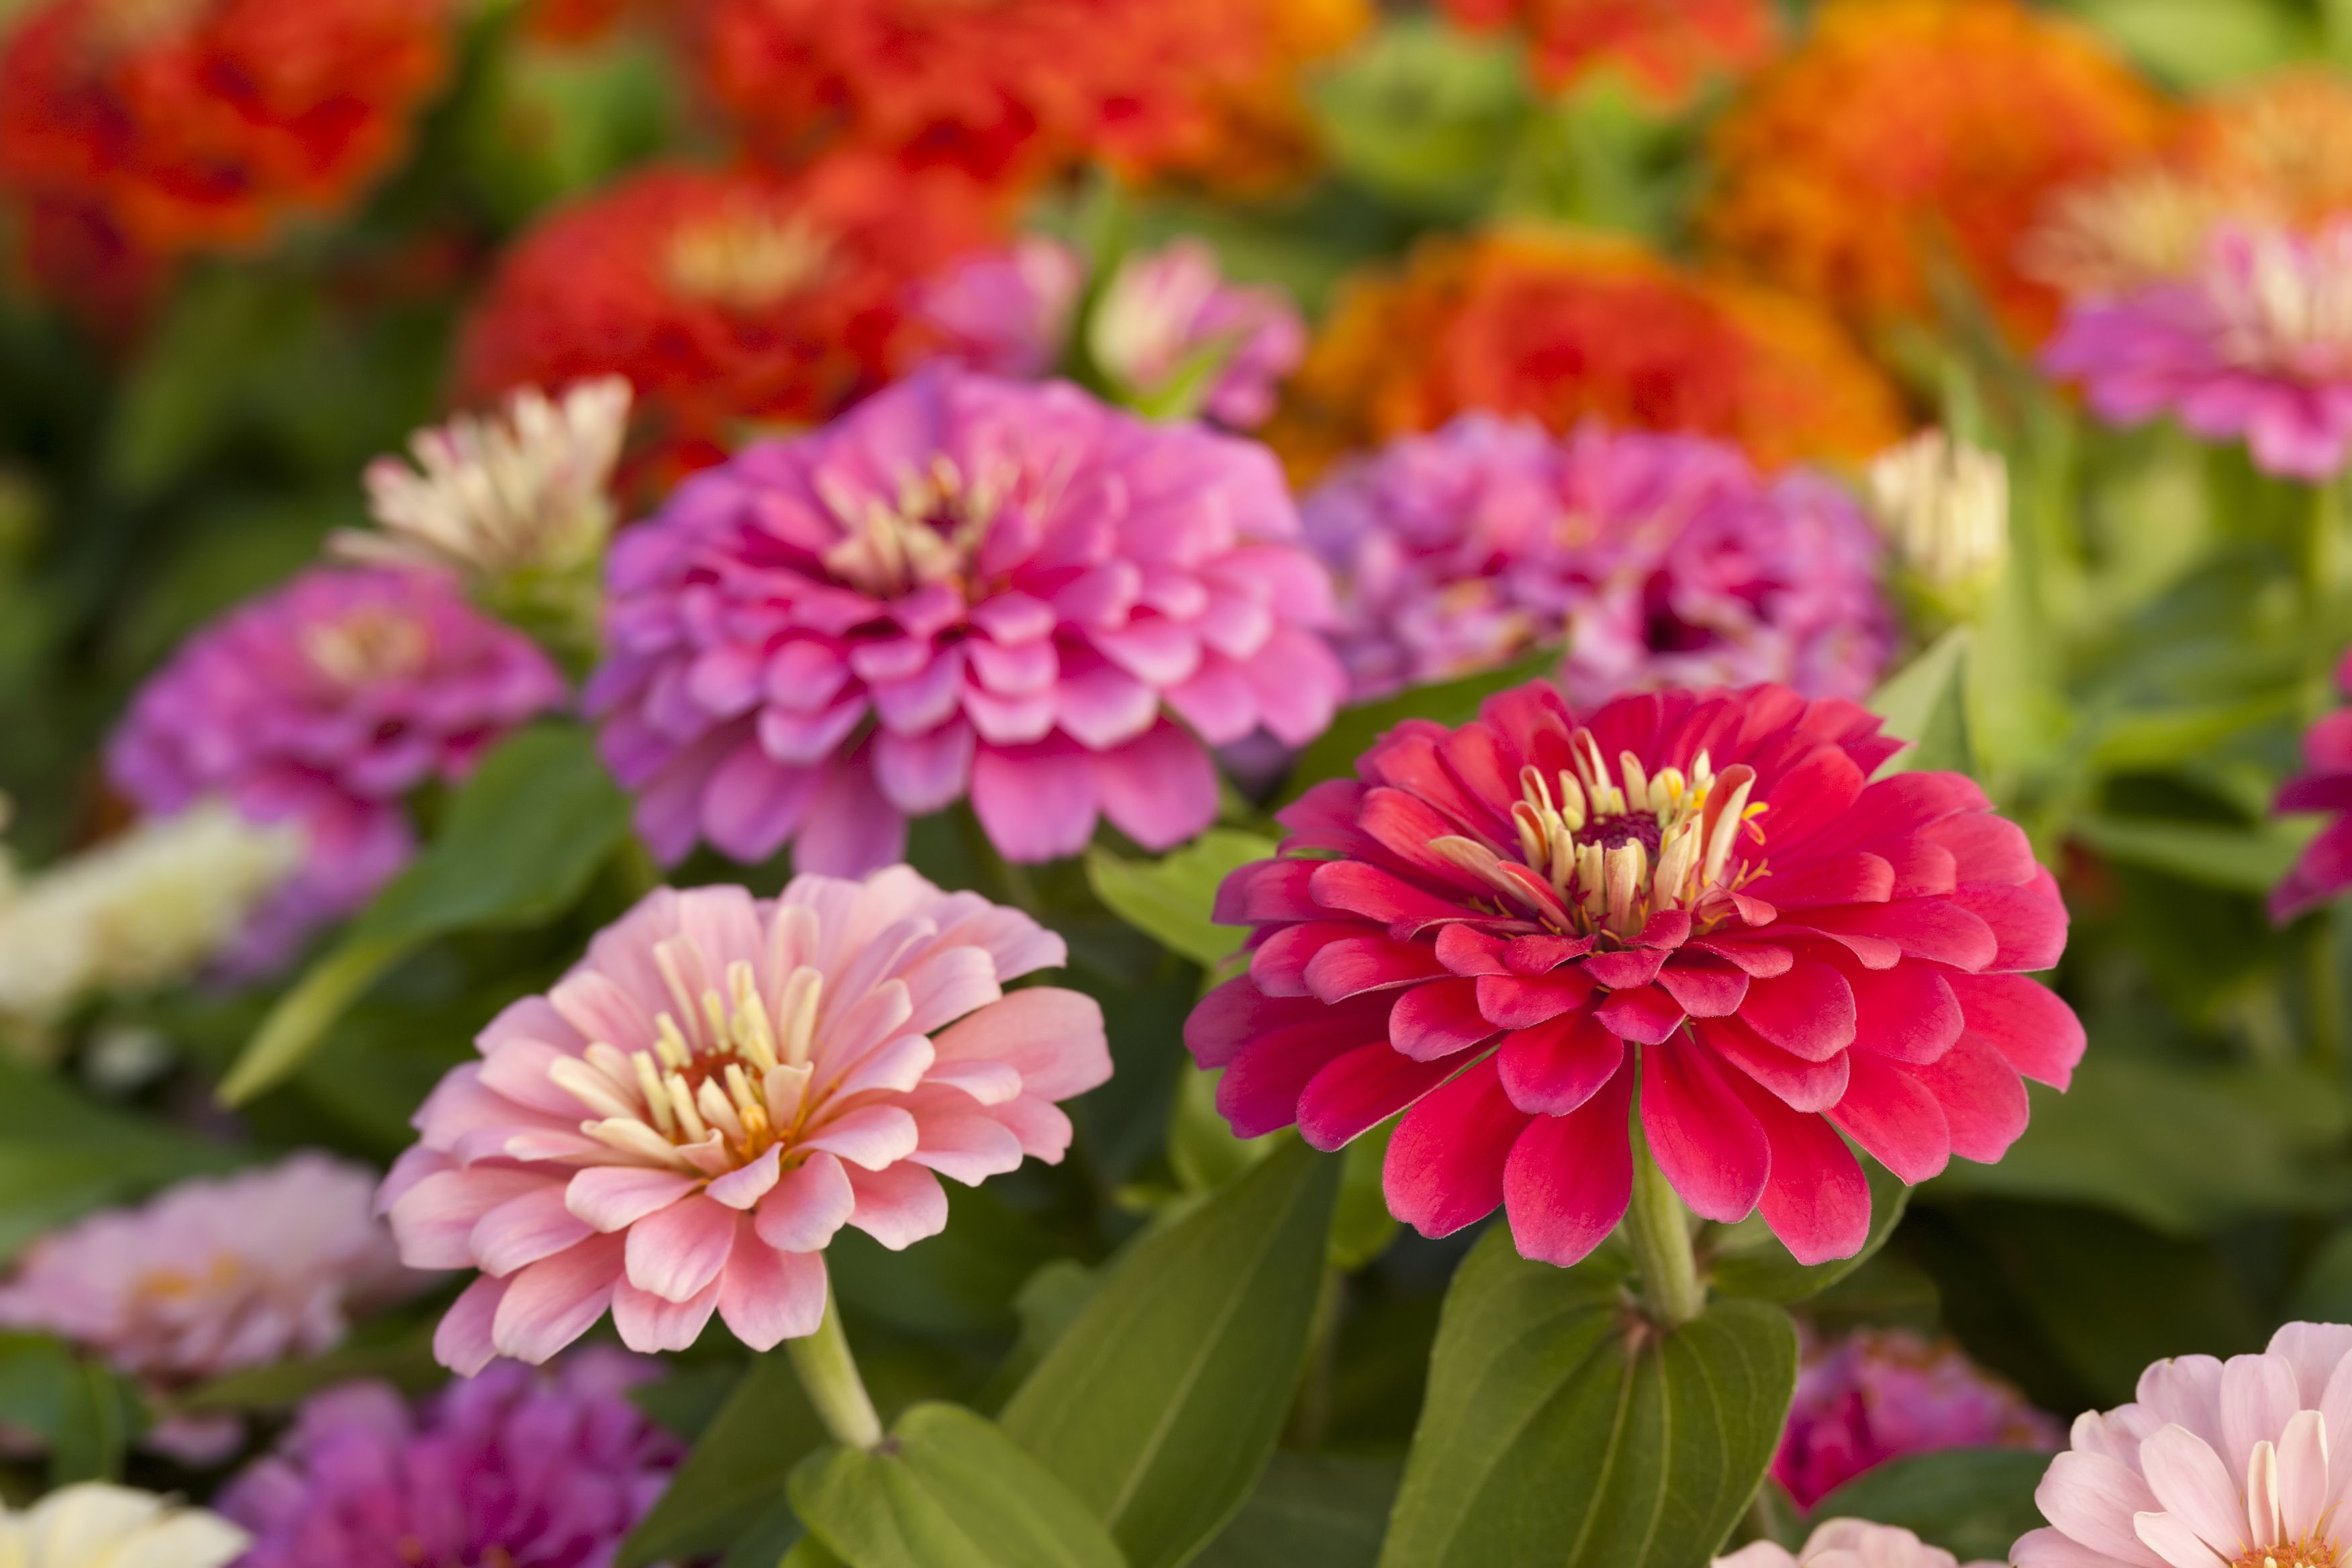 Image of Zinnia purple annuals that bloom all summer